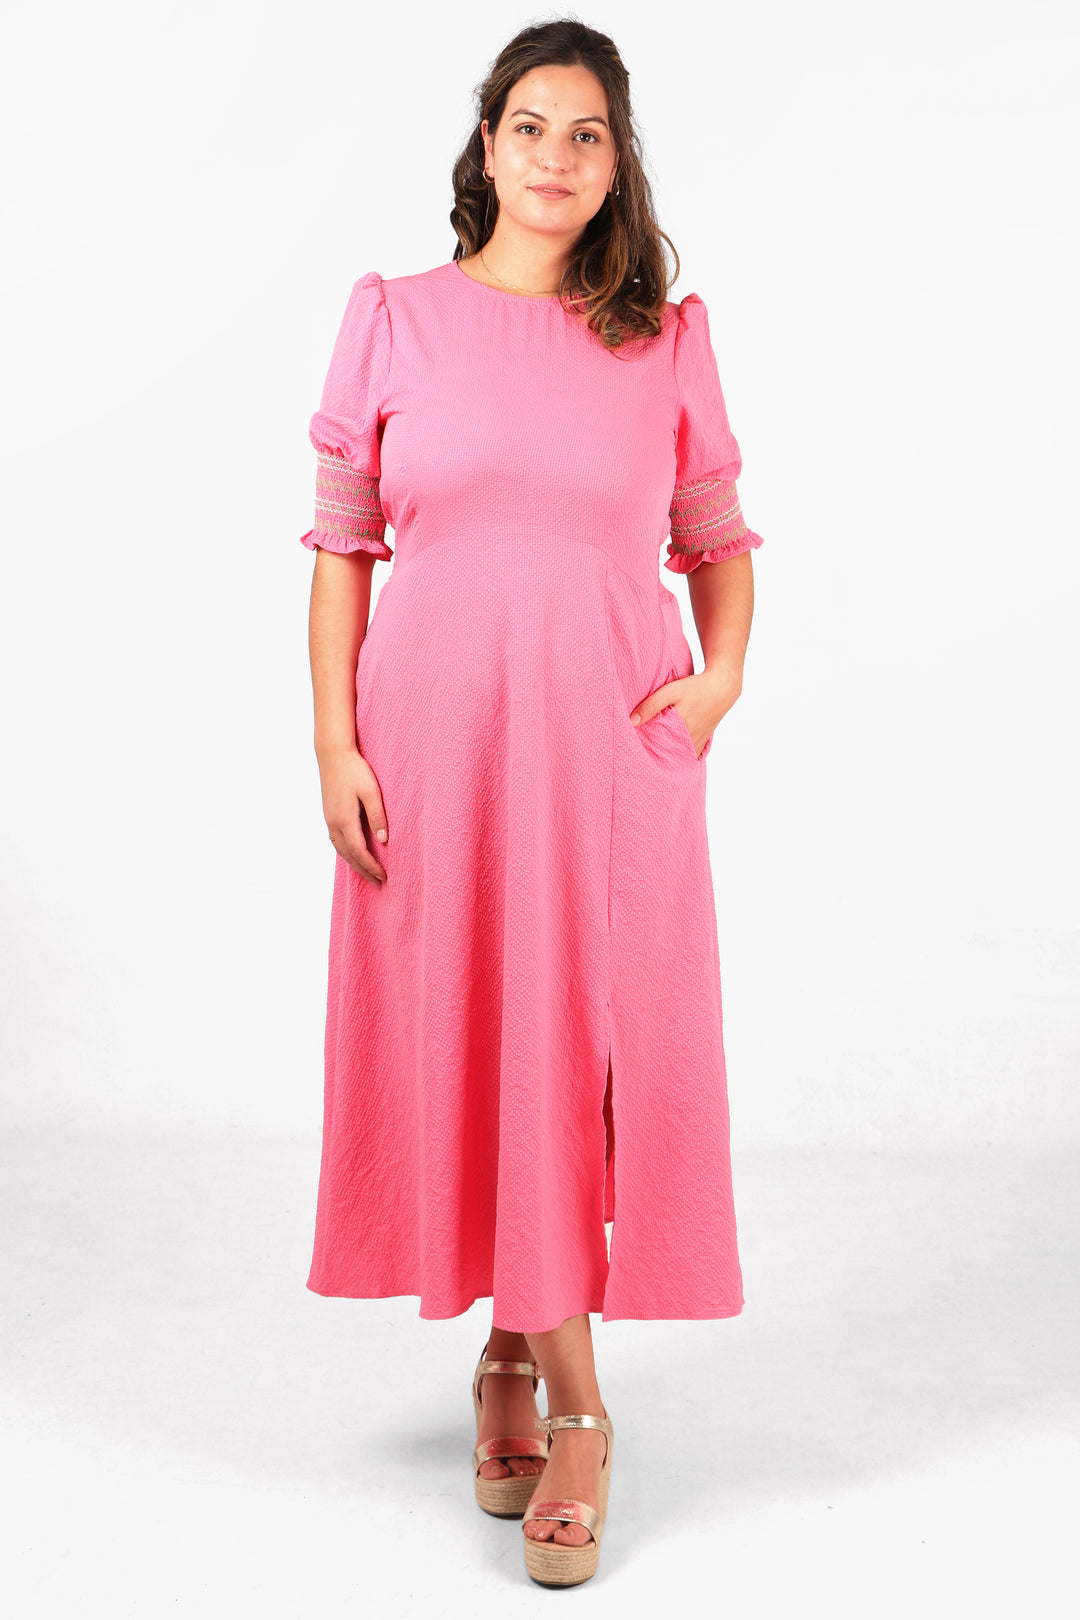 model wearing a pink tea dress with 3/4 elbow length embroidered sleeves, front split and round neck